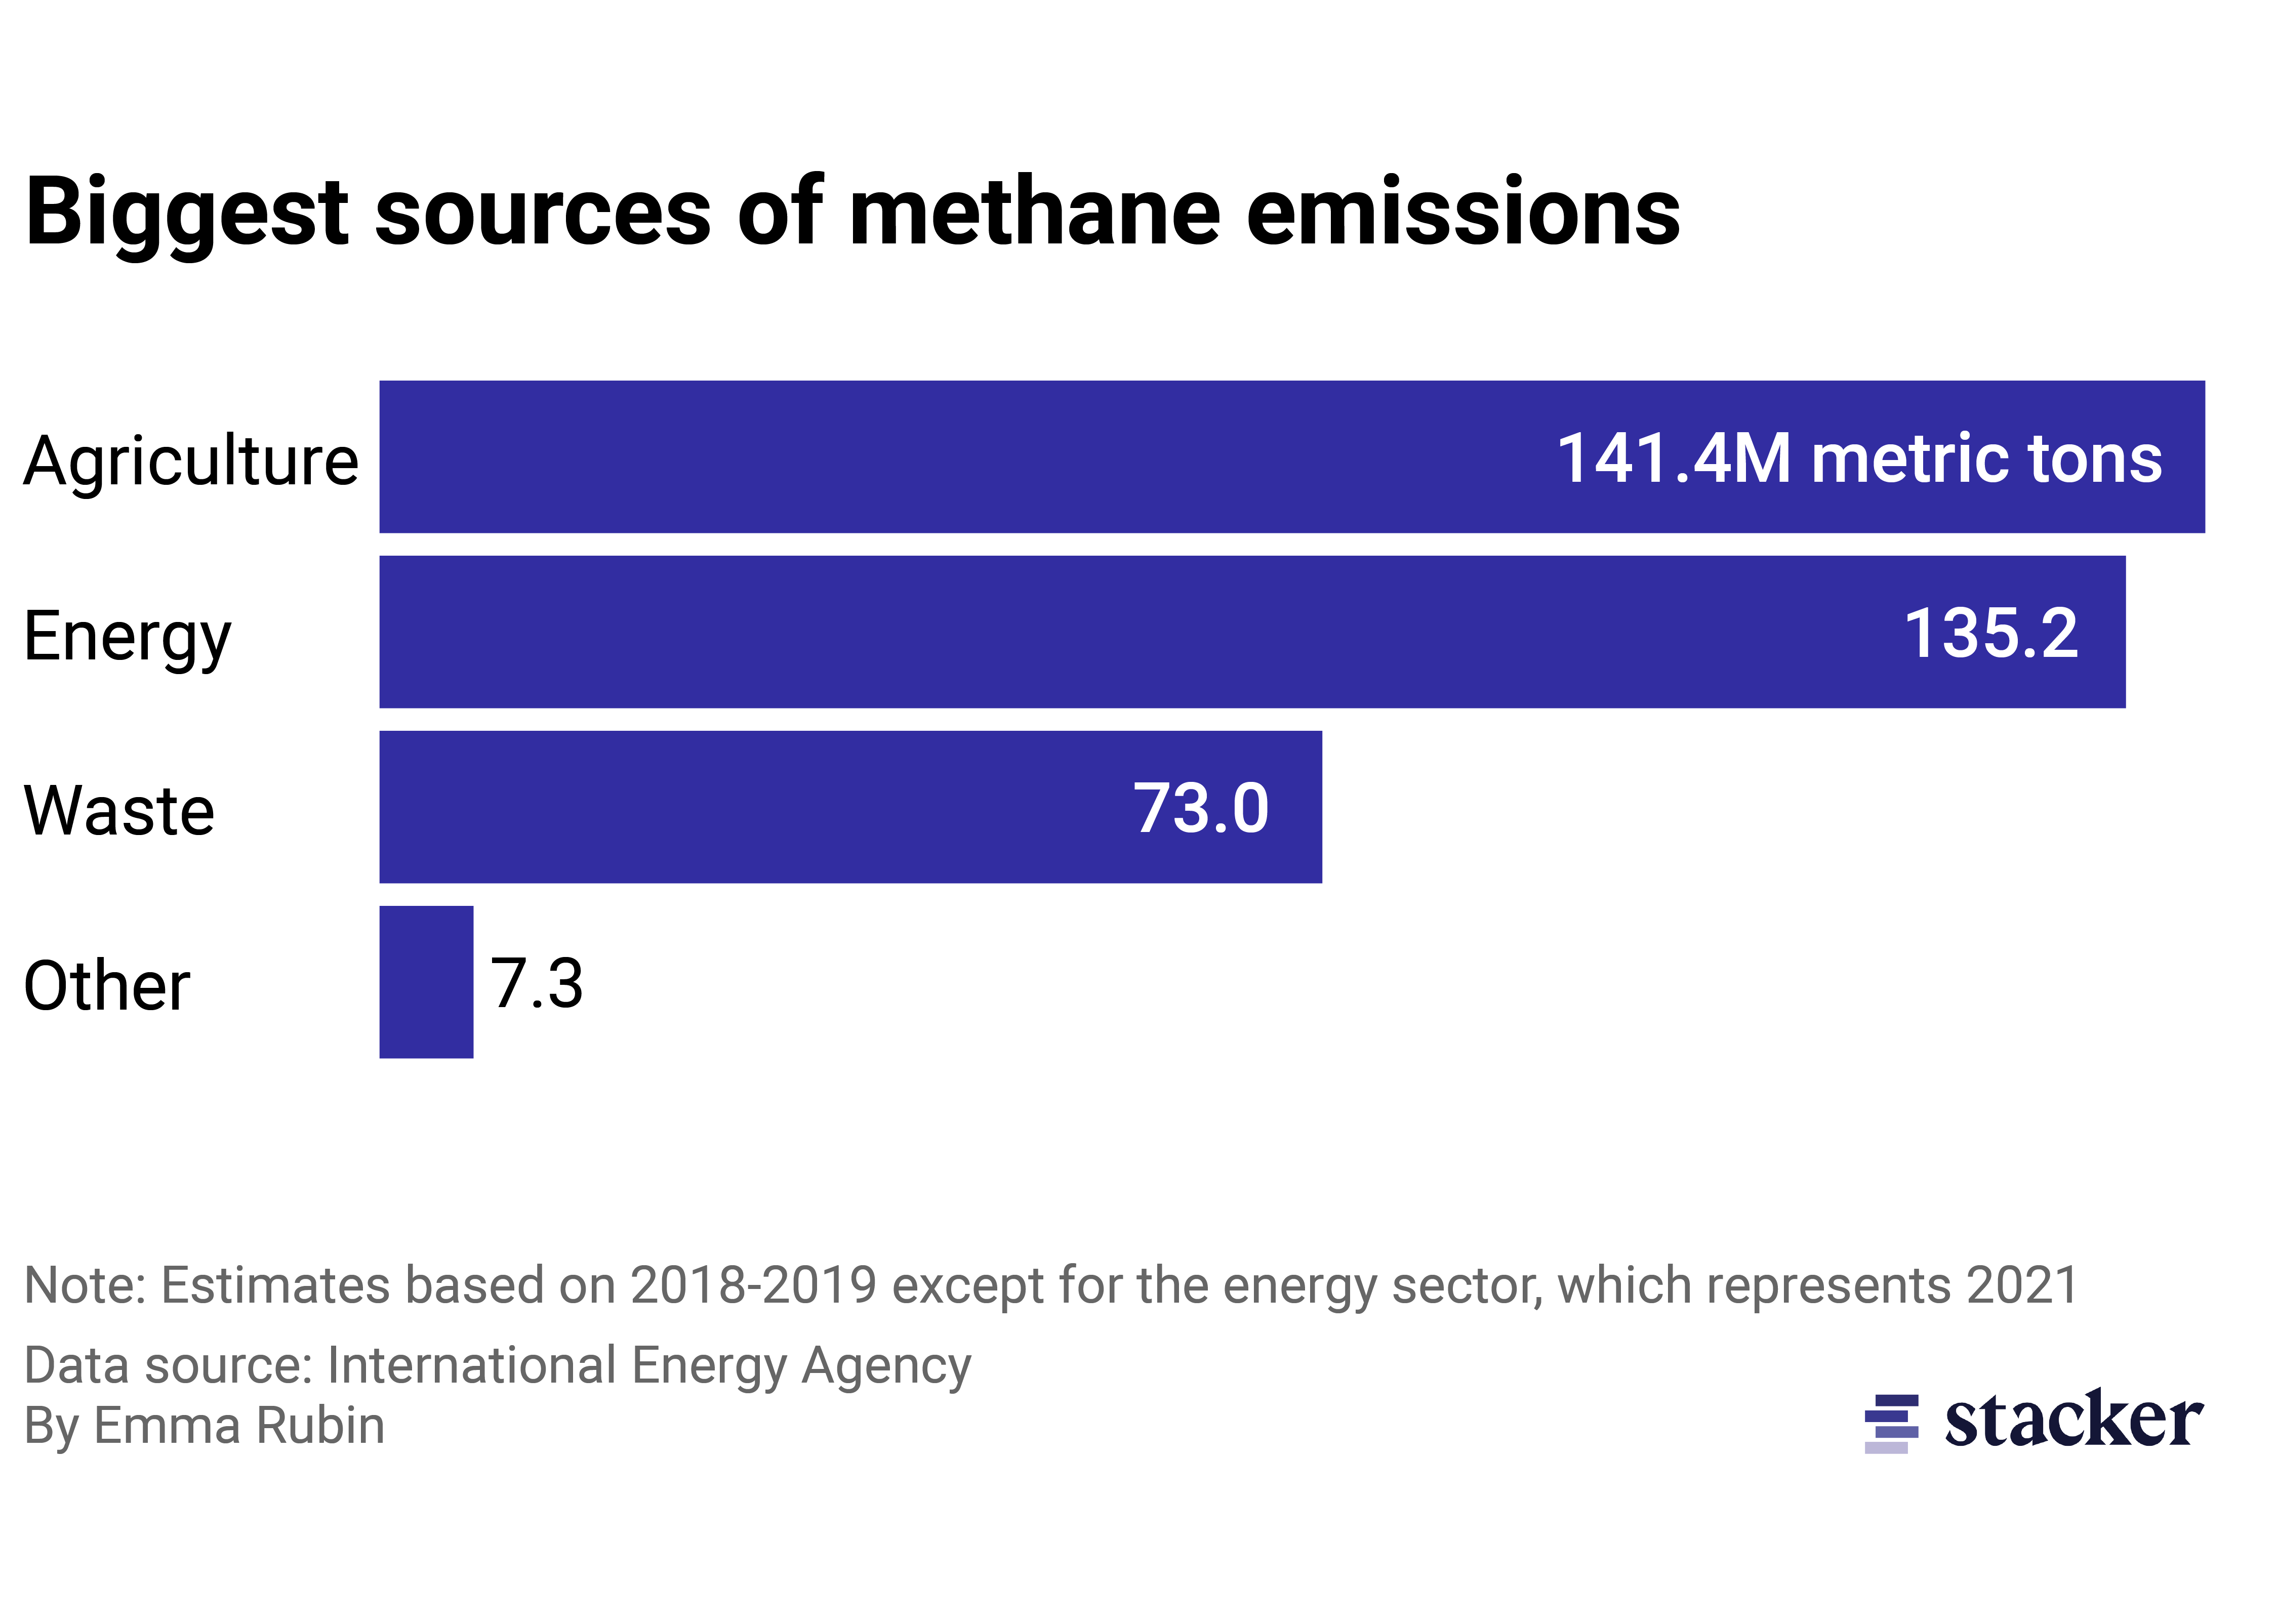 Bar chart showing methane emissions by sector including agriculture, energy, waste and other